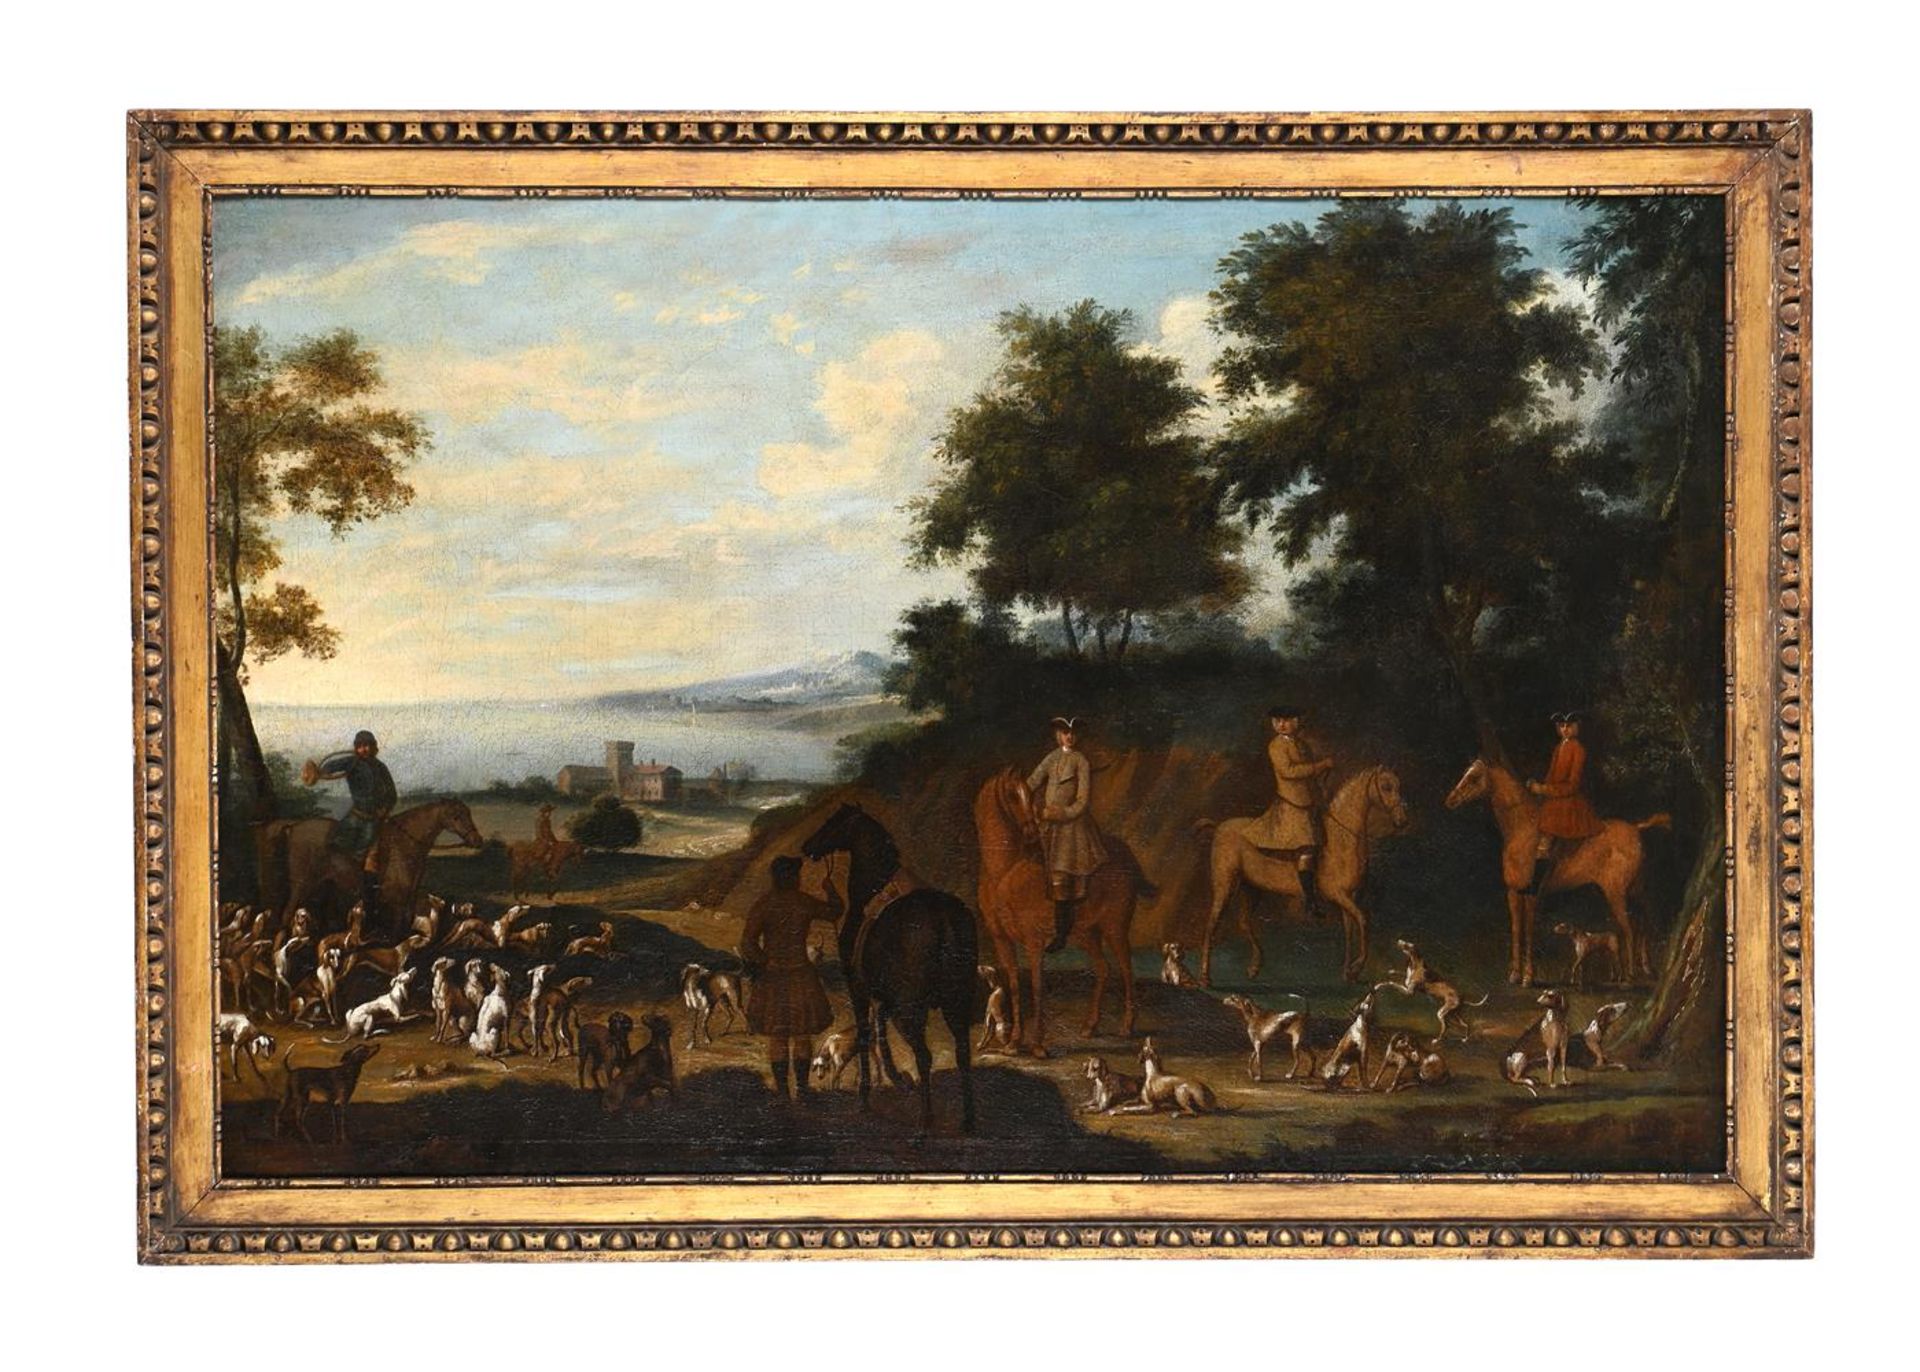 ATTRIBUTED TO JAMES ROSS (BRITISH CIRCA 1700-1760), A GROUP OF MOUNTED SPORTSMEN WITH HOUNDS - Image 2 of 3